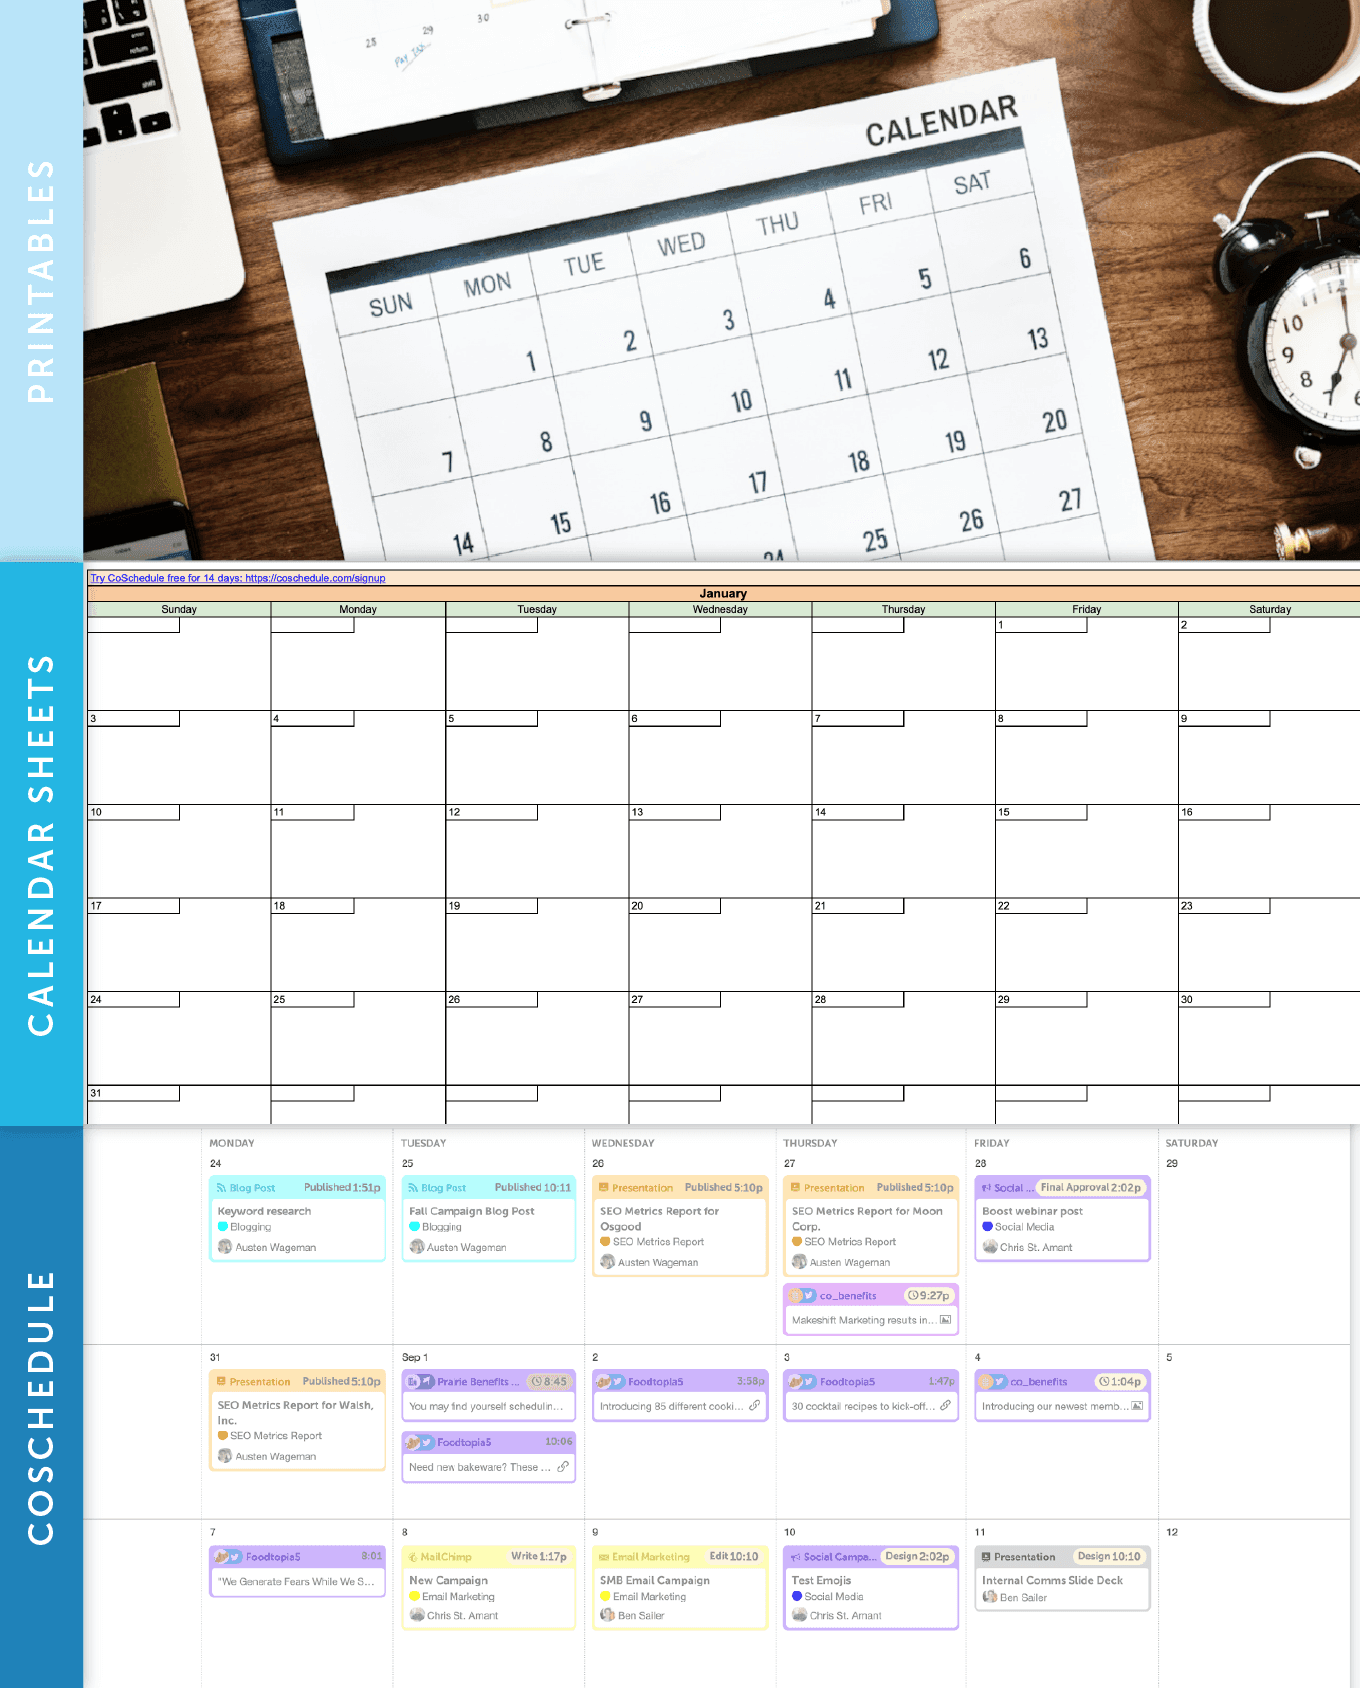 Three different types of content calendars